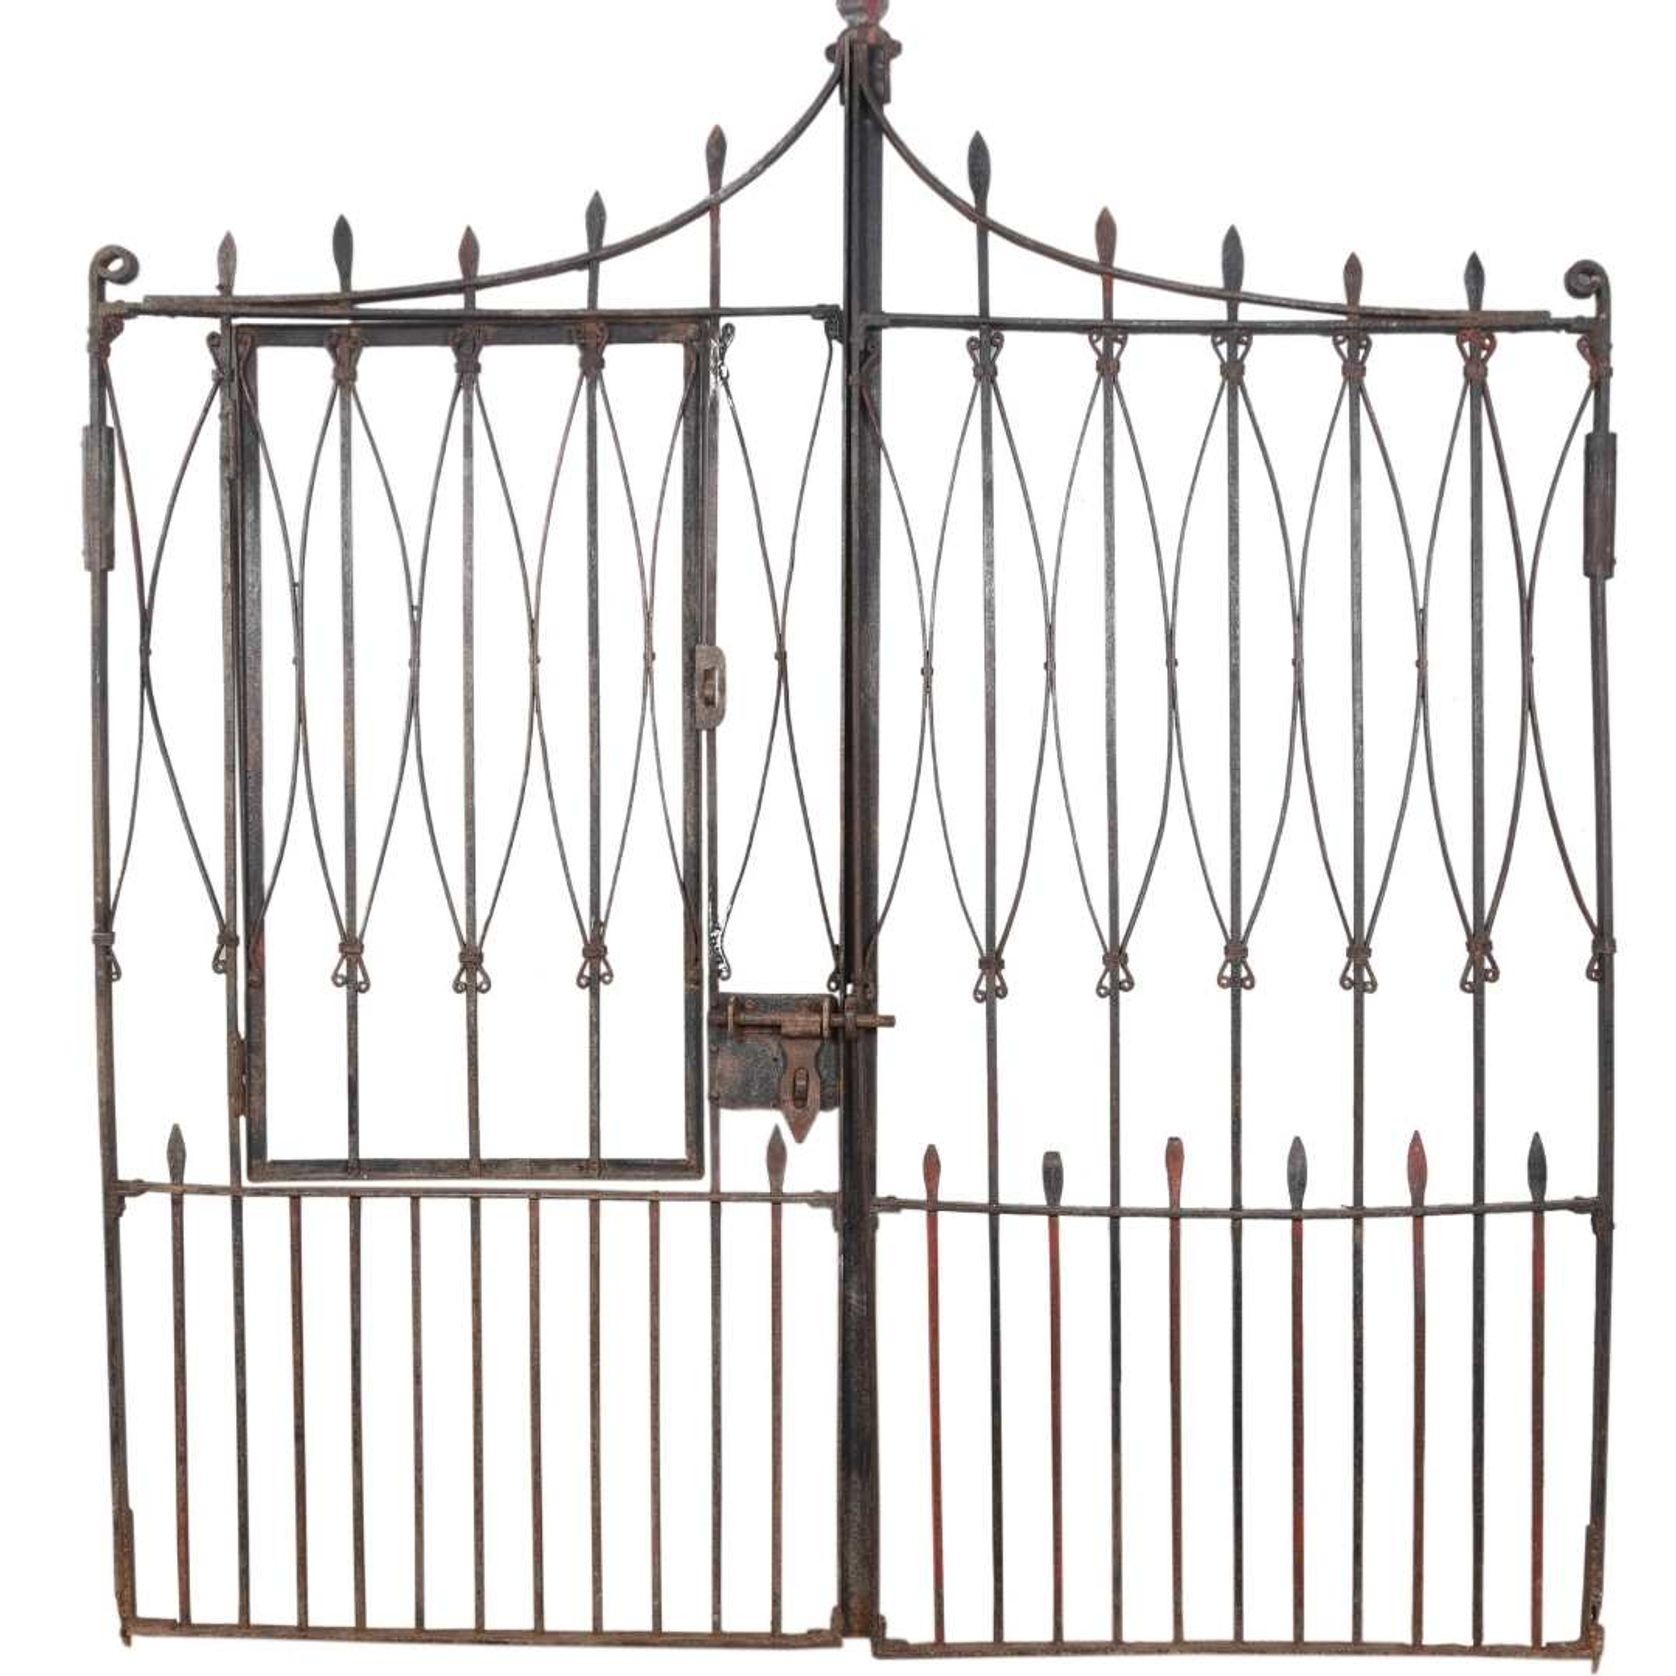 Original Wrought Iron Gate with wicket gate gallery detail image